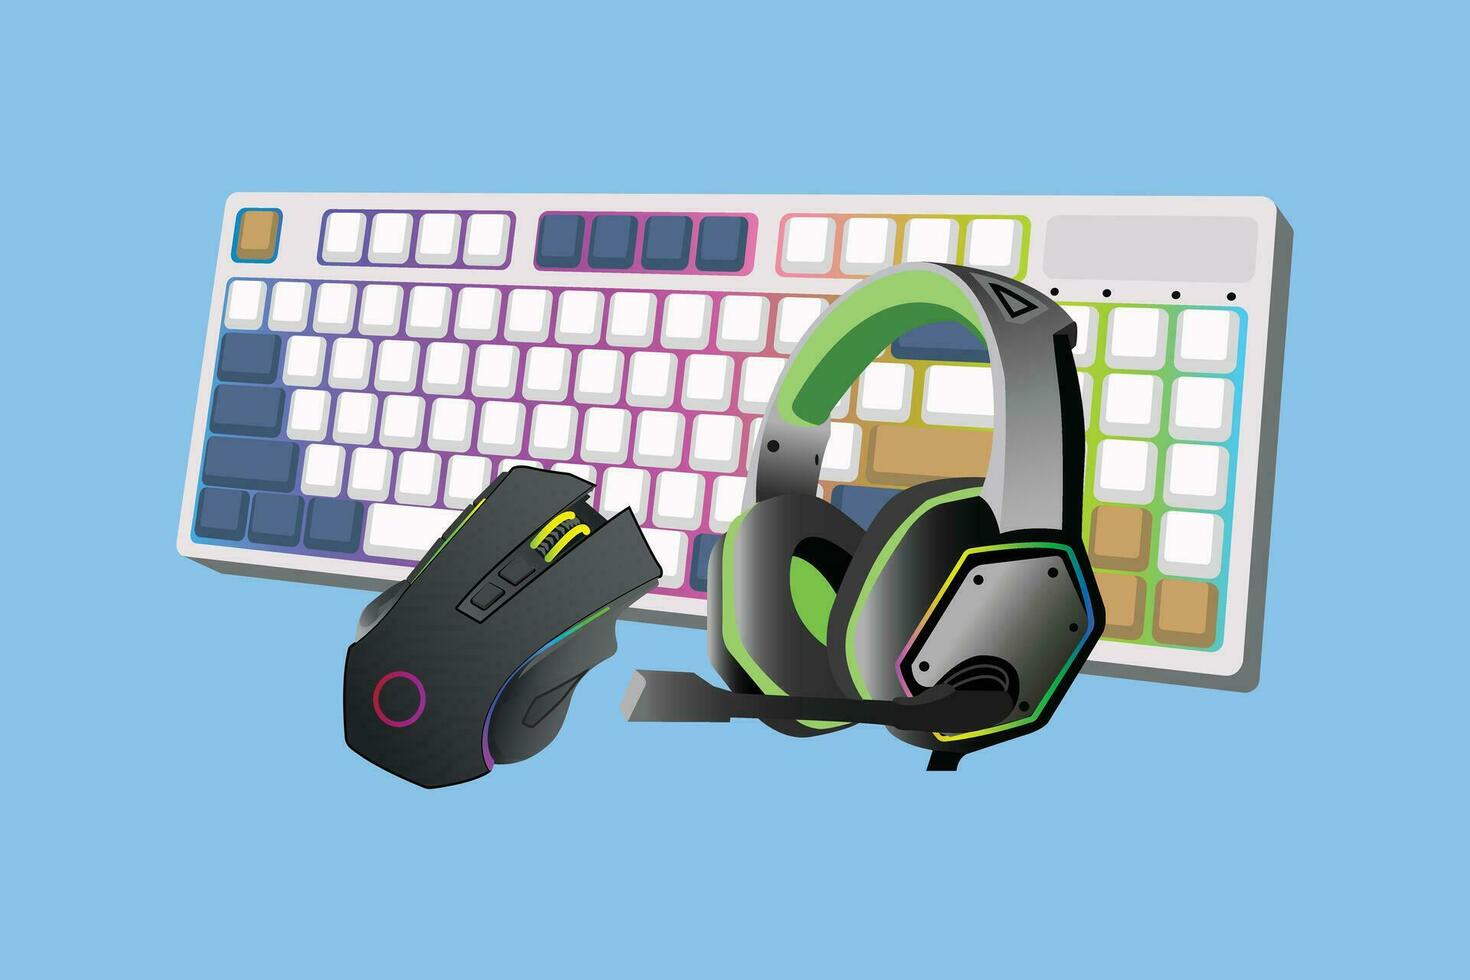 Colorful Gaming Combo Vector Containing a Keyboard, Mouse and Headphones design for vector illustration.